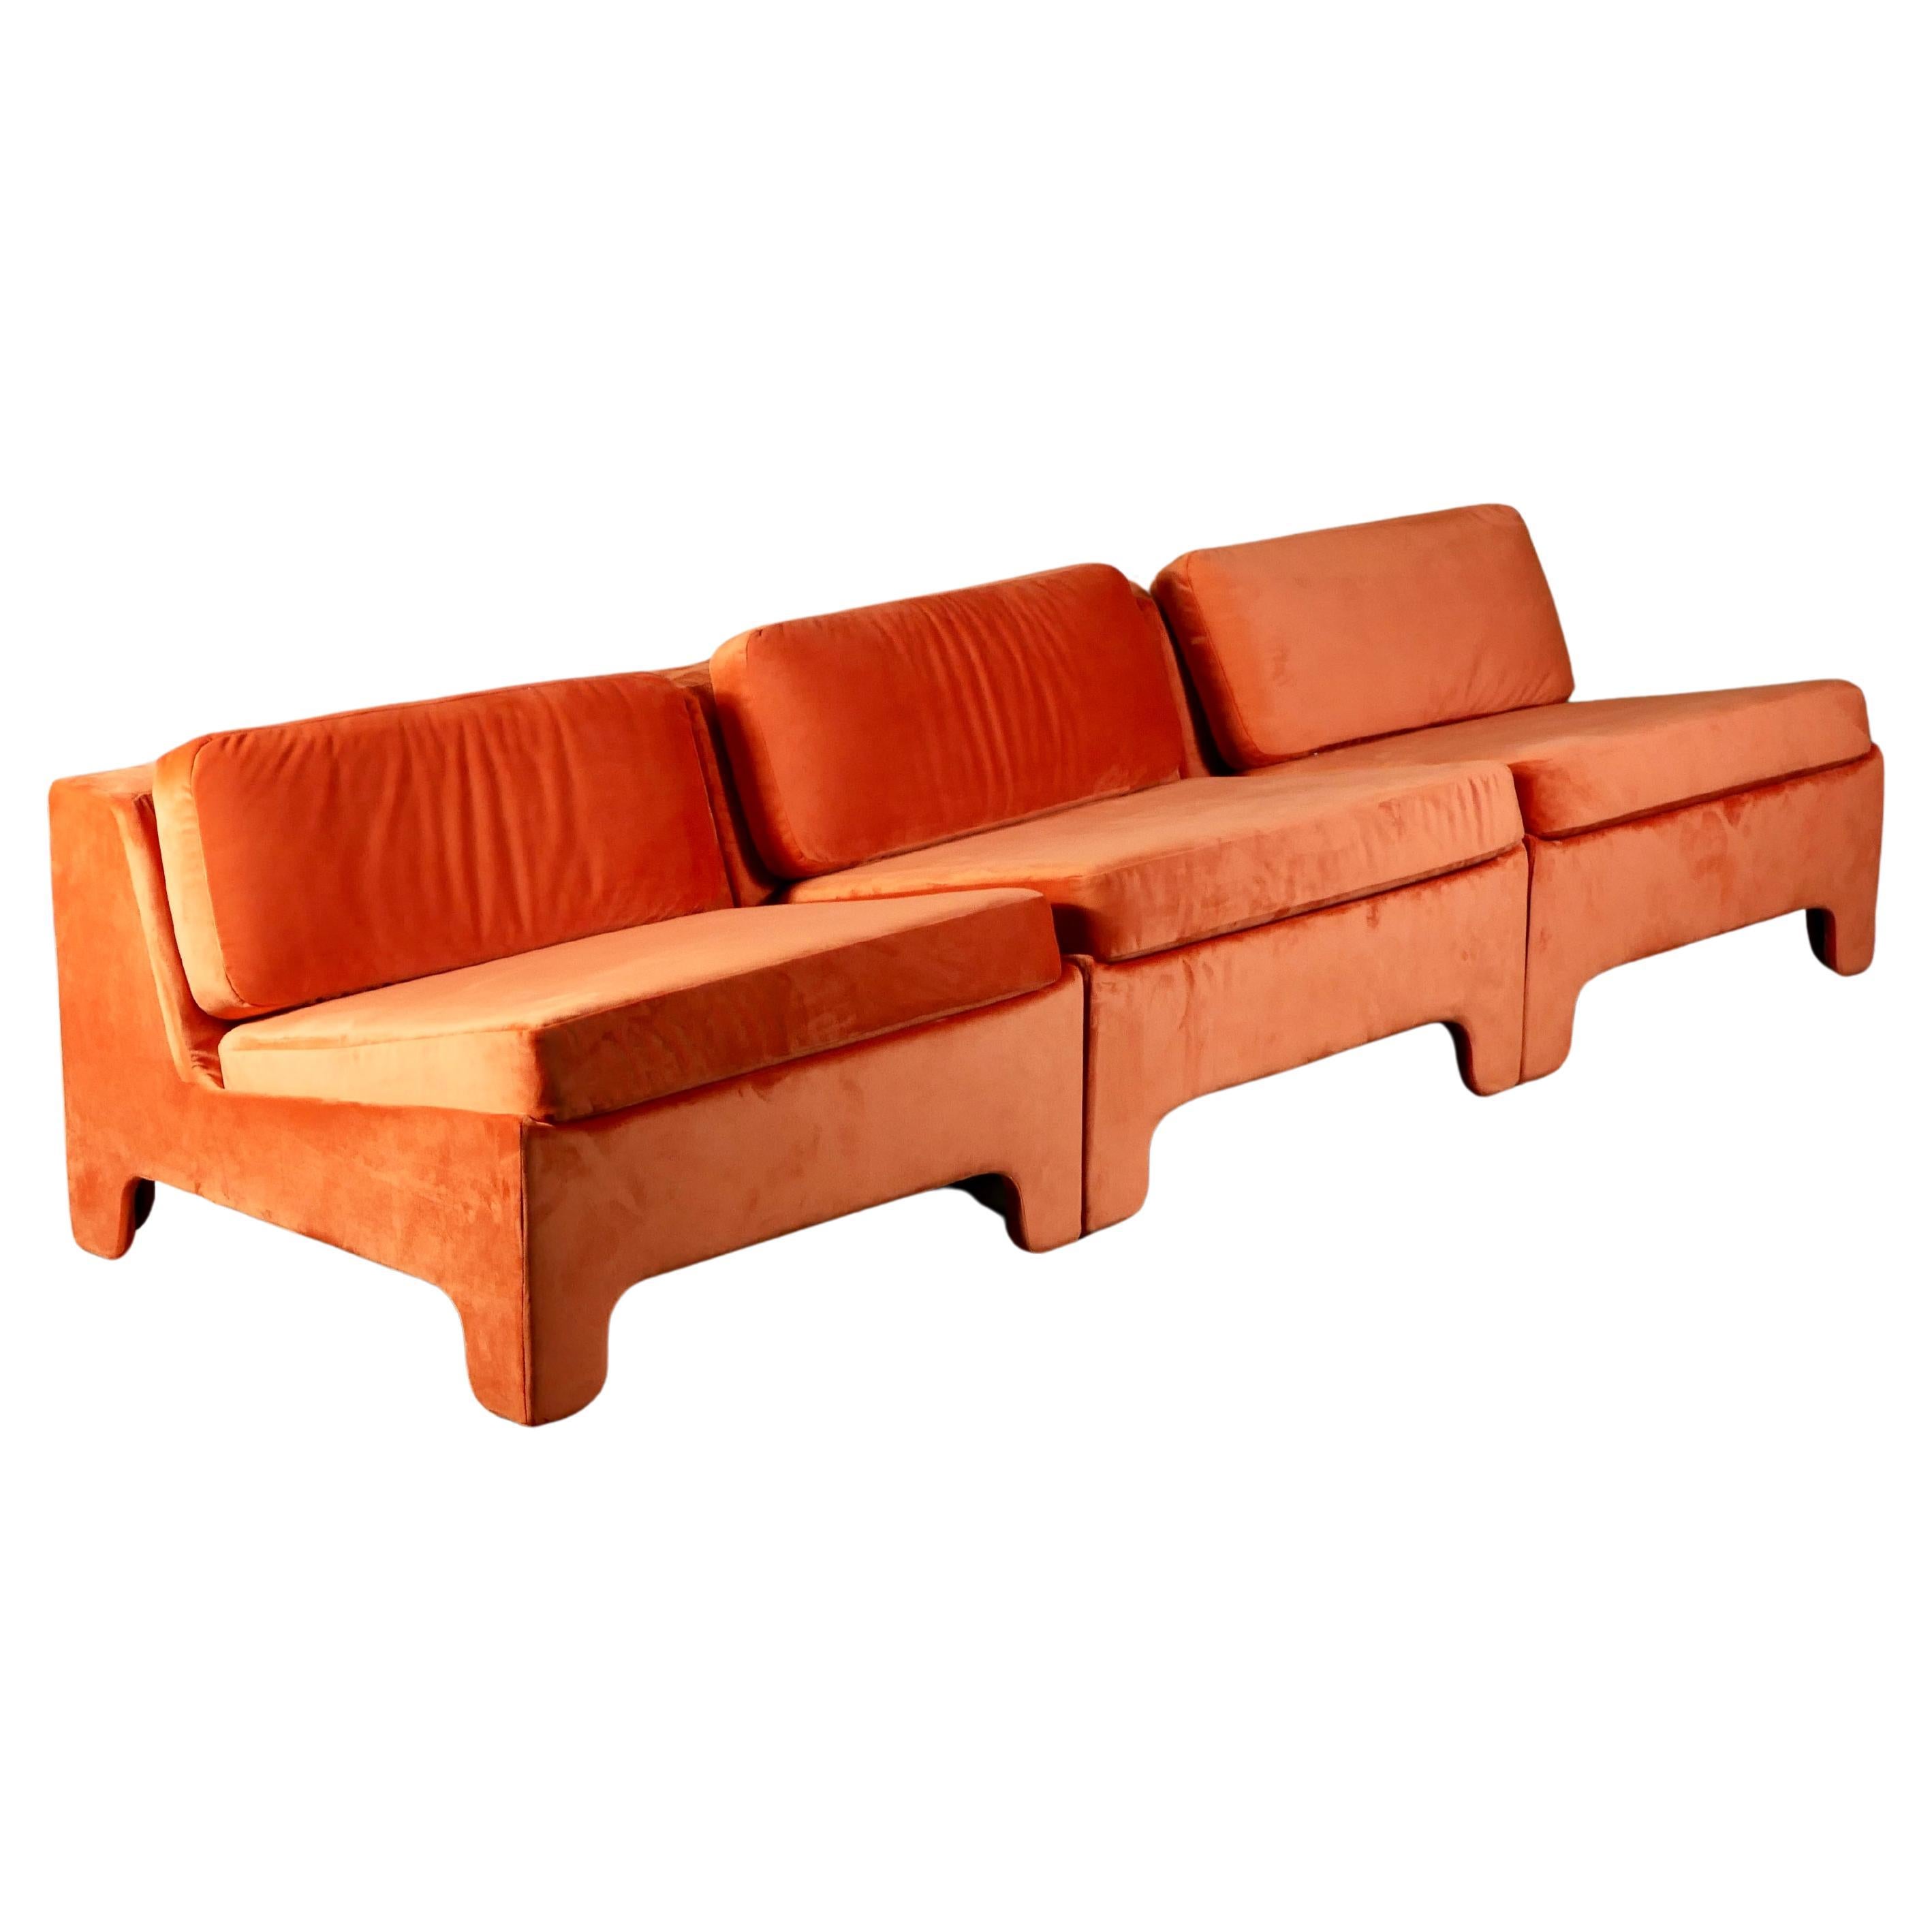 Space Age Set of 3 orange velvet armchairs by Beaufort, made in Belgium, 1970s